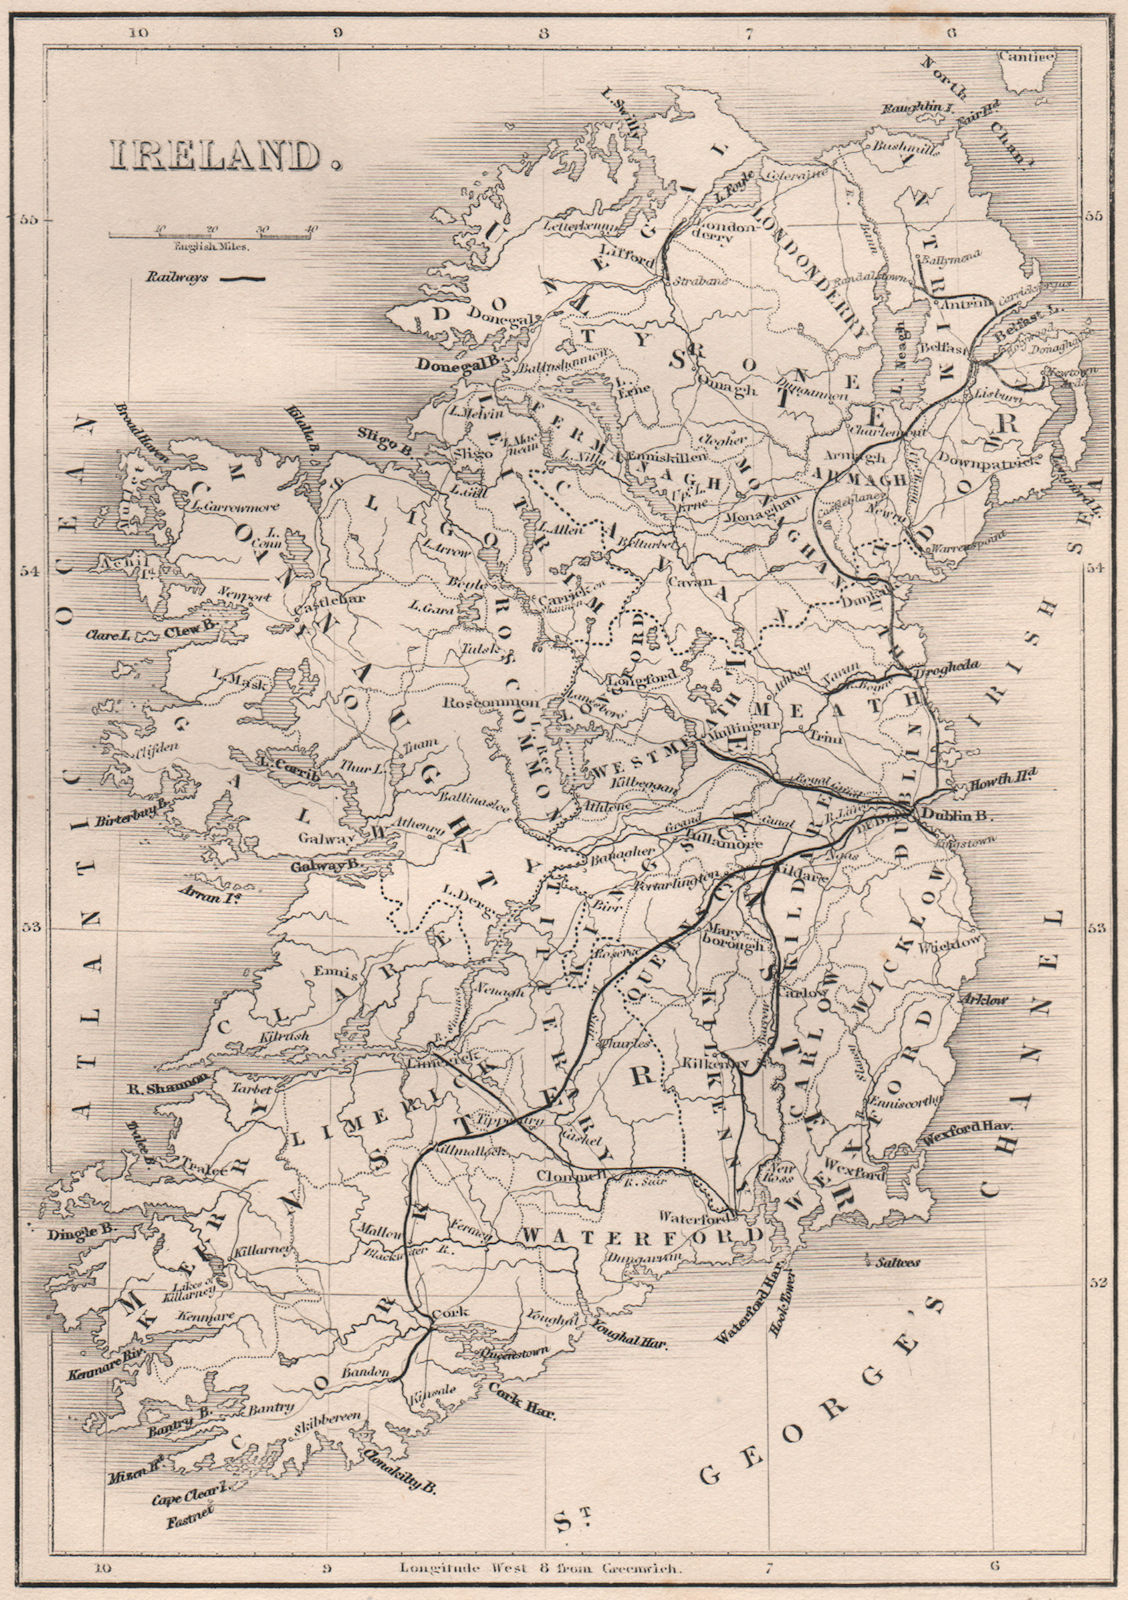 Antique map of IRELAND with railways, counties & provinces by Alfred ADLARD 1835